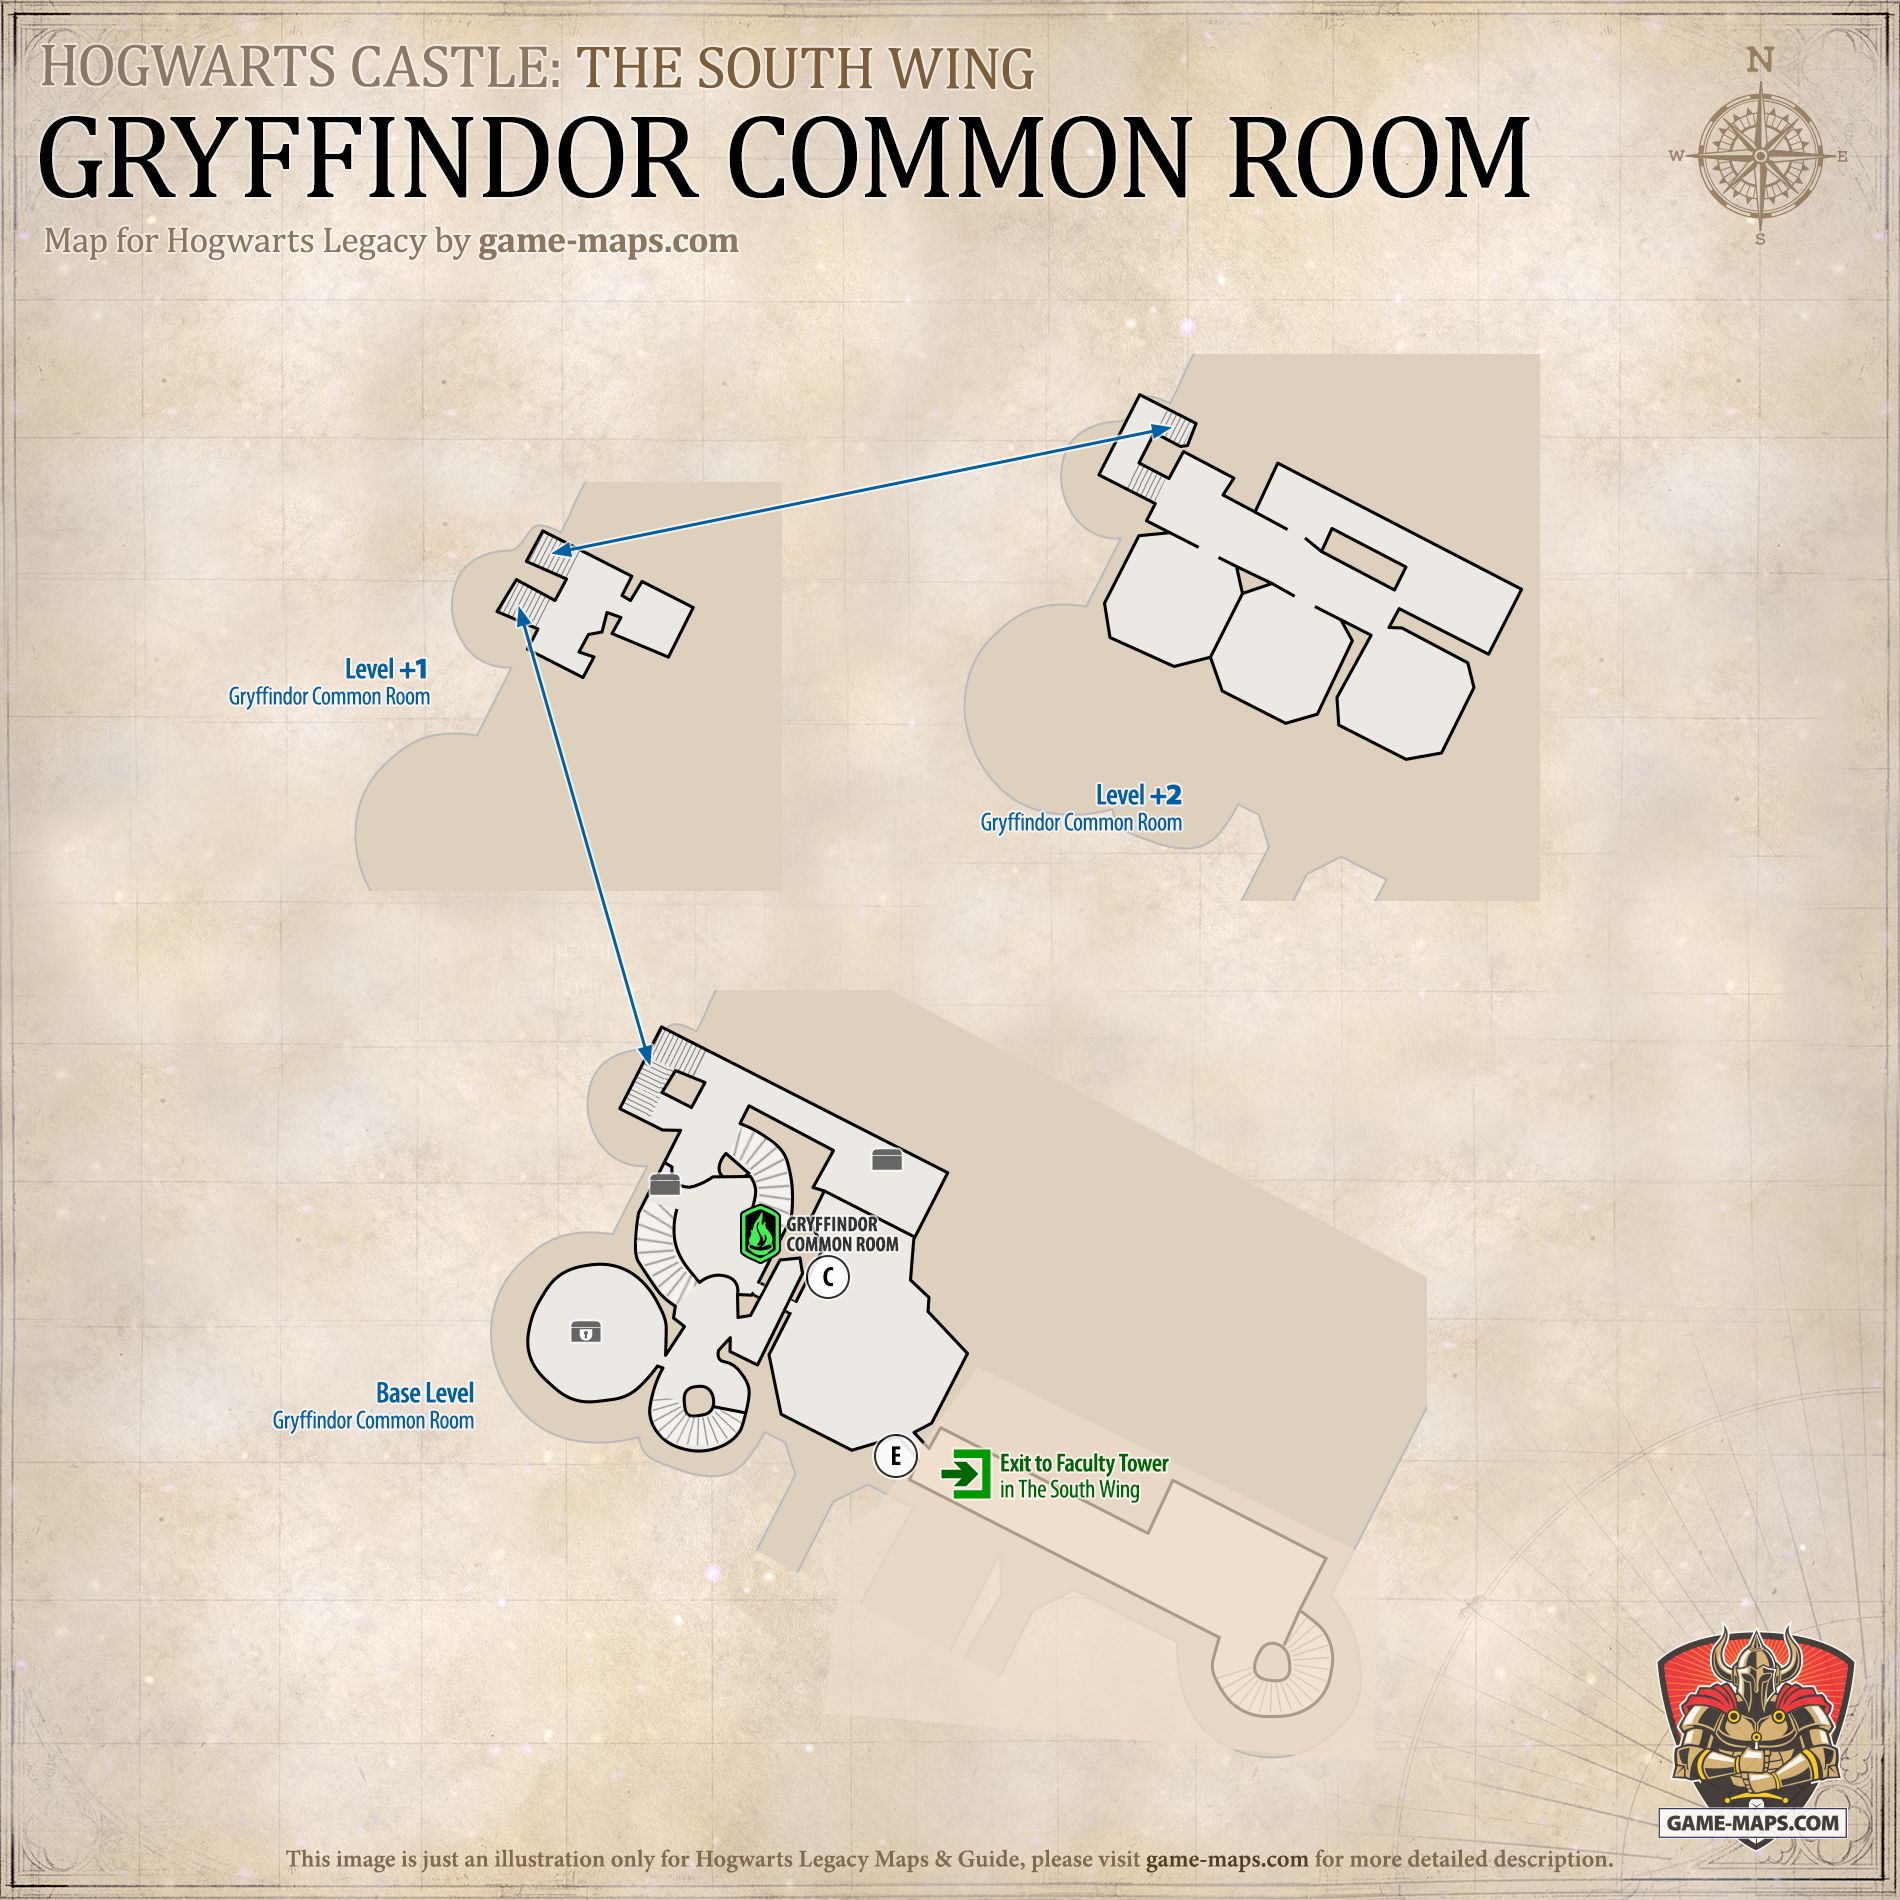 Gryffindor Common Room Map for Hogwarts Legacy